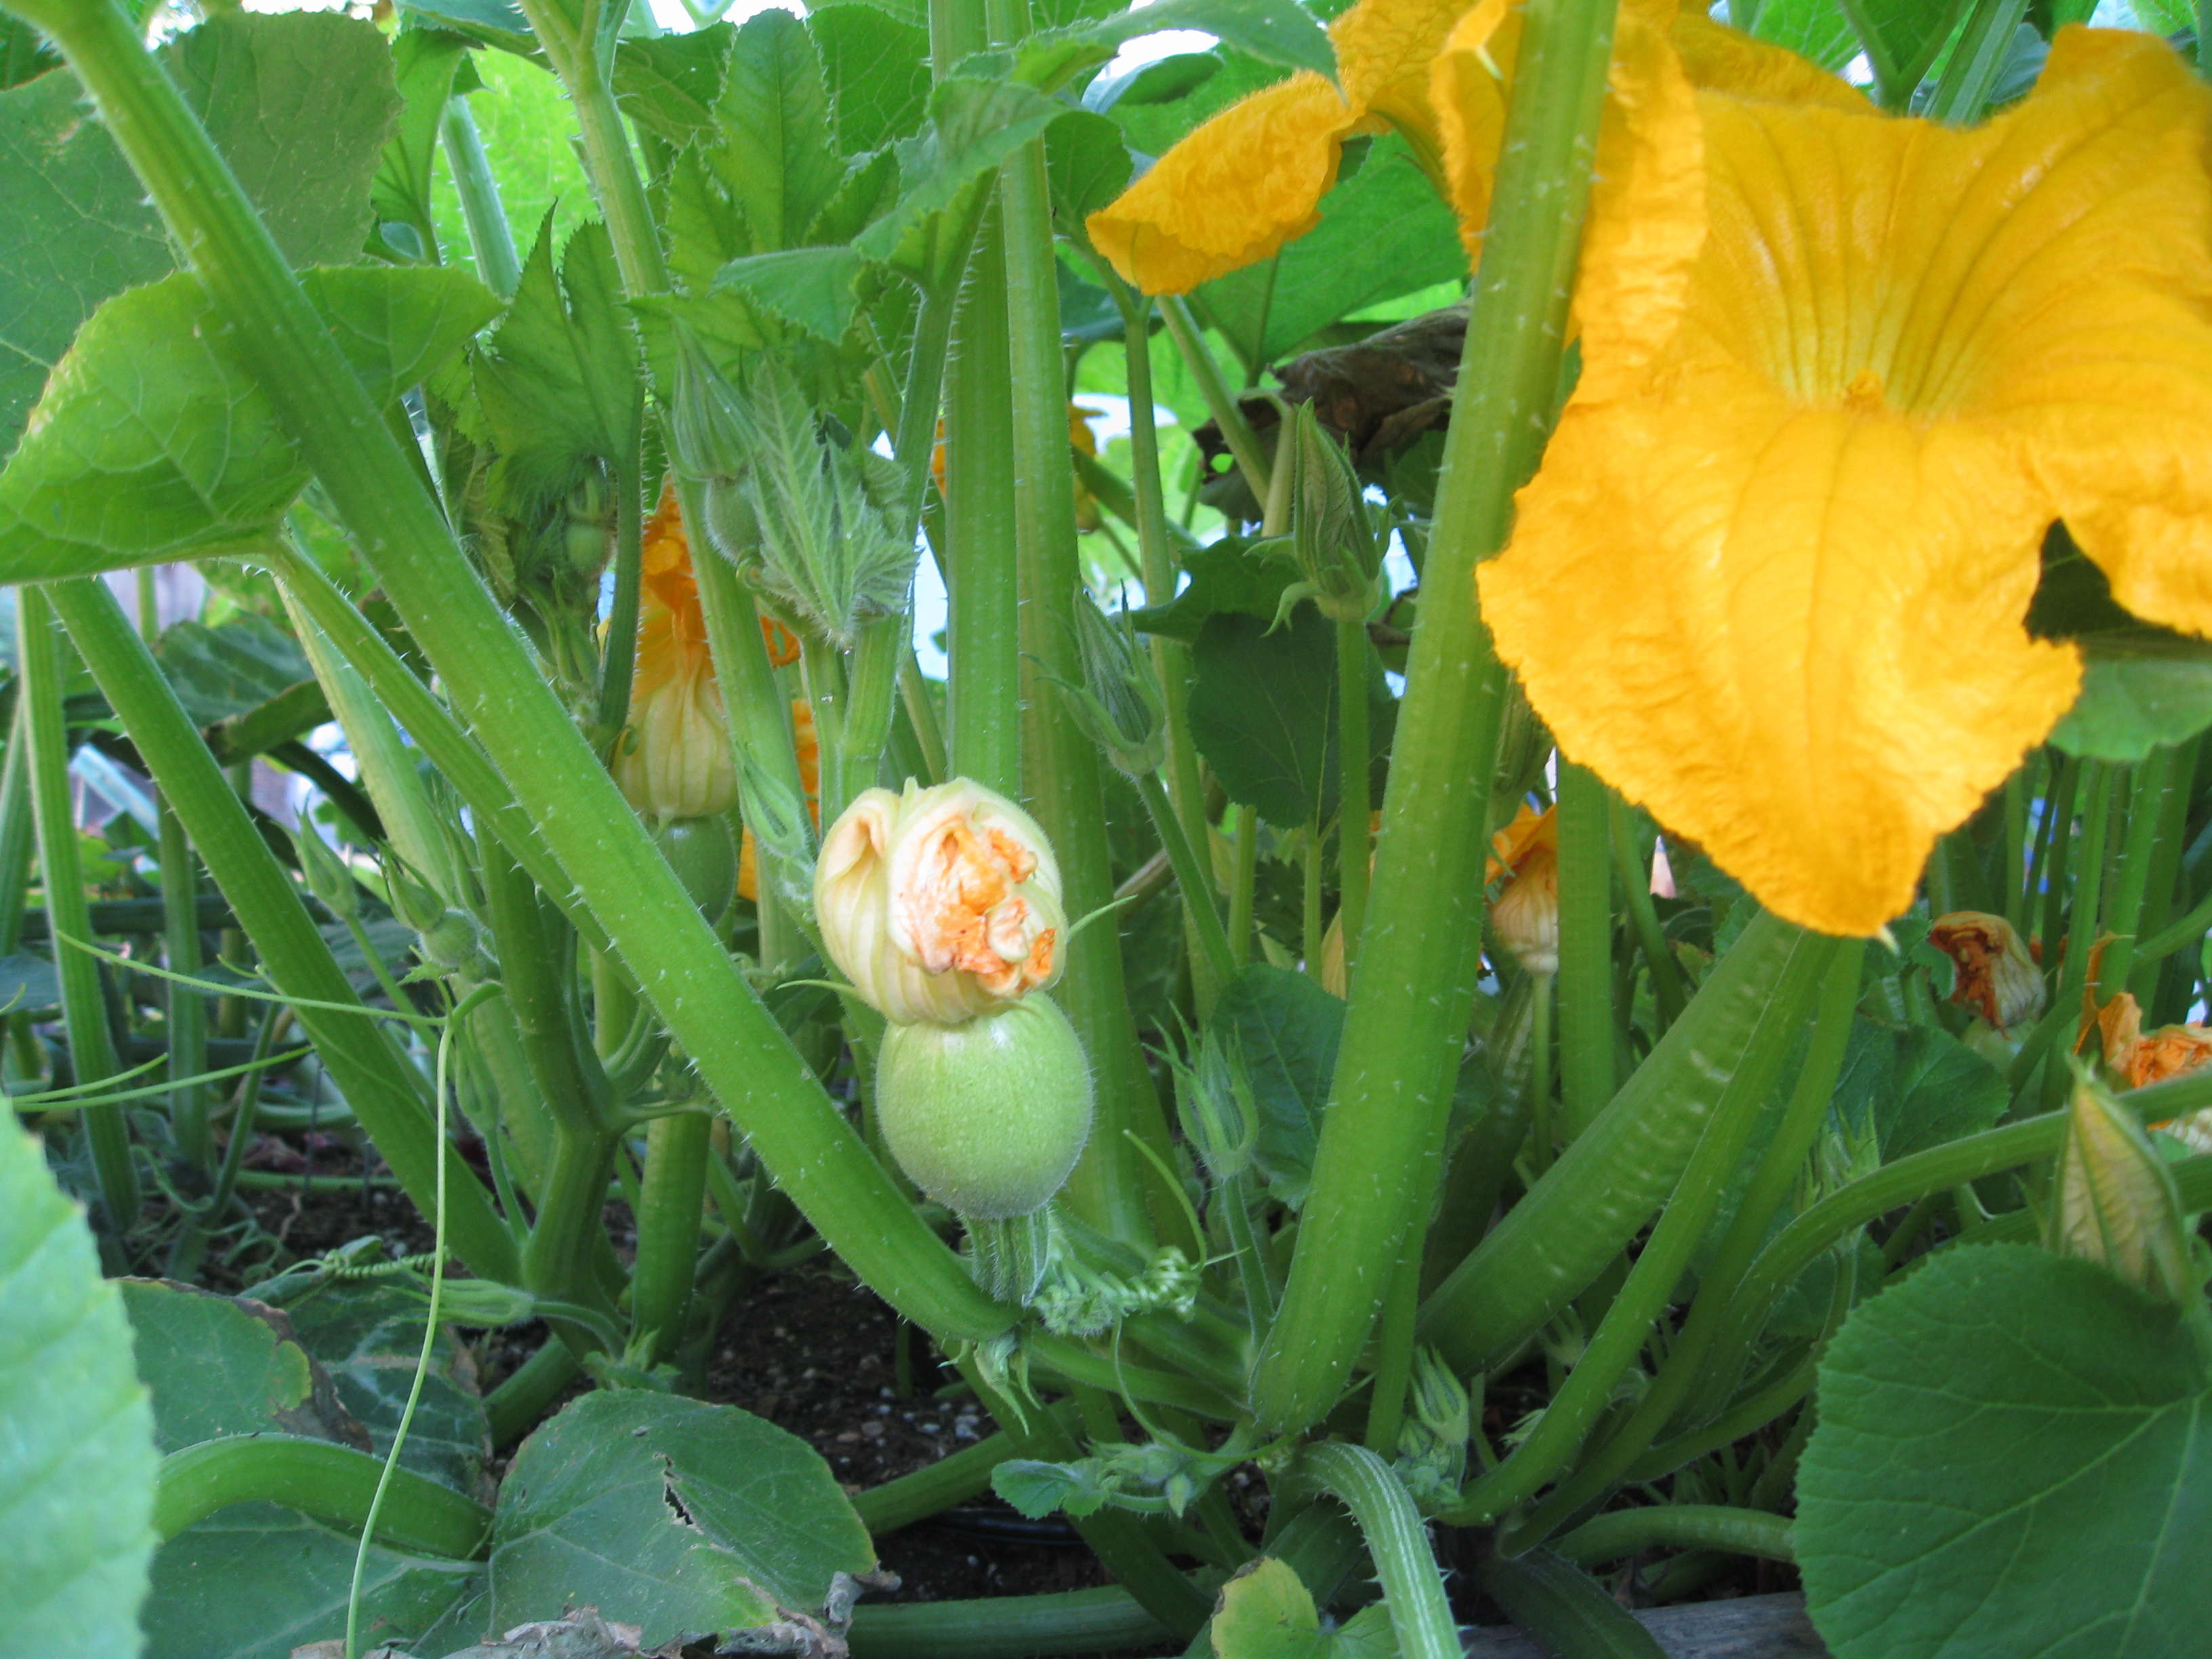 Acorn squash (or maybe not?) flowers and sets fruit.